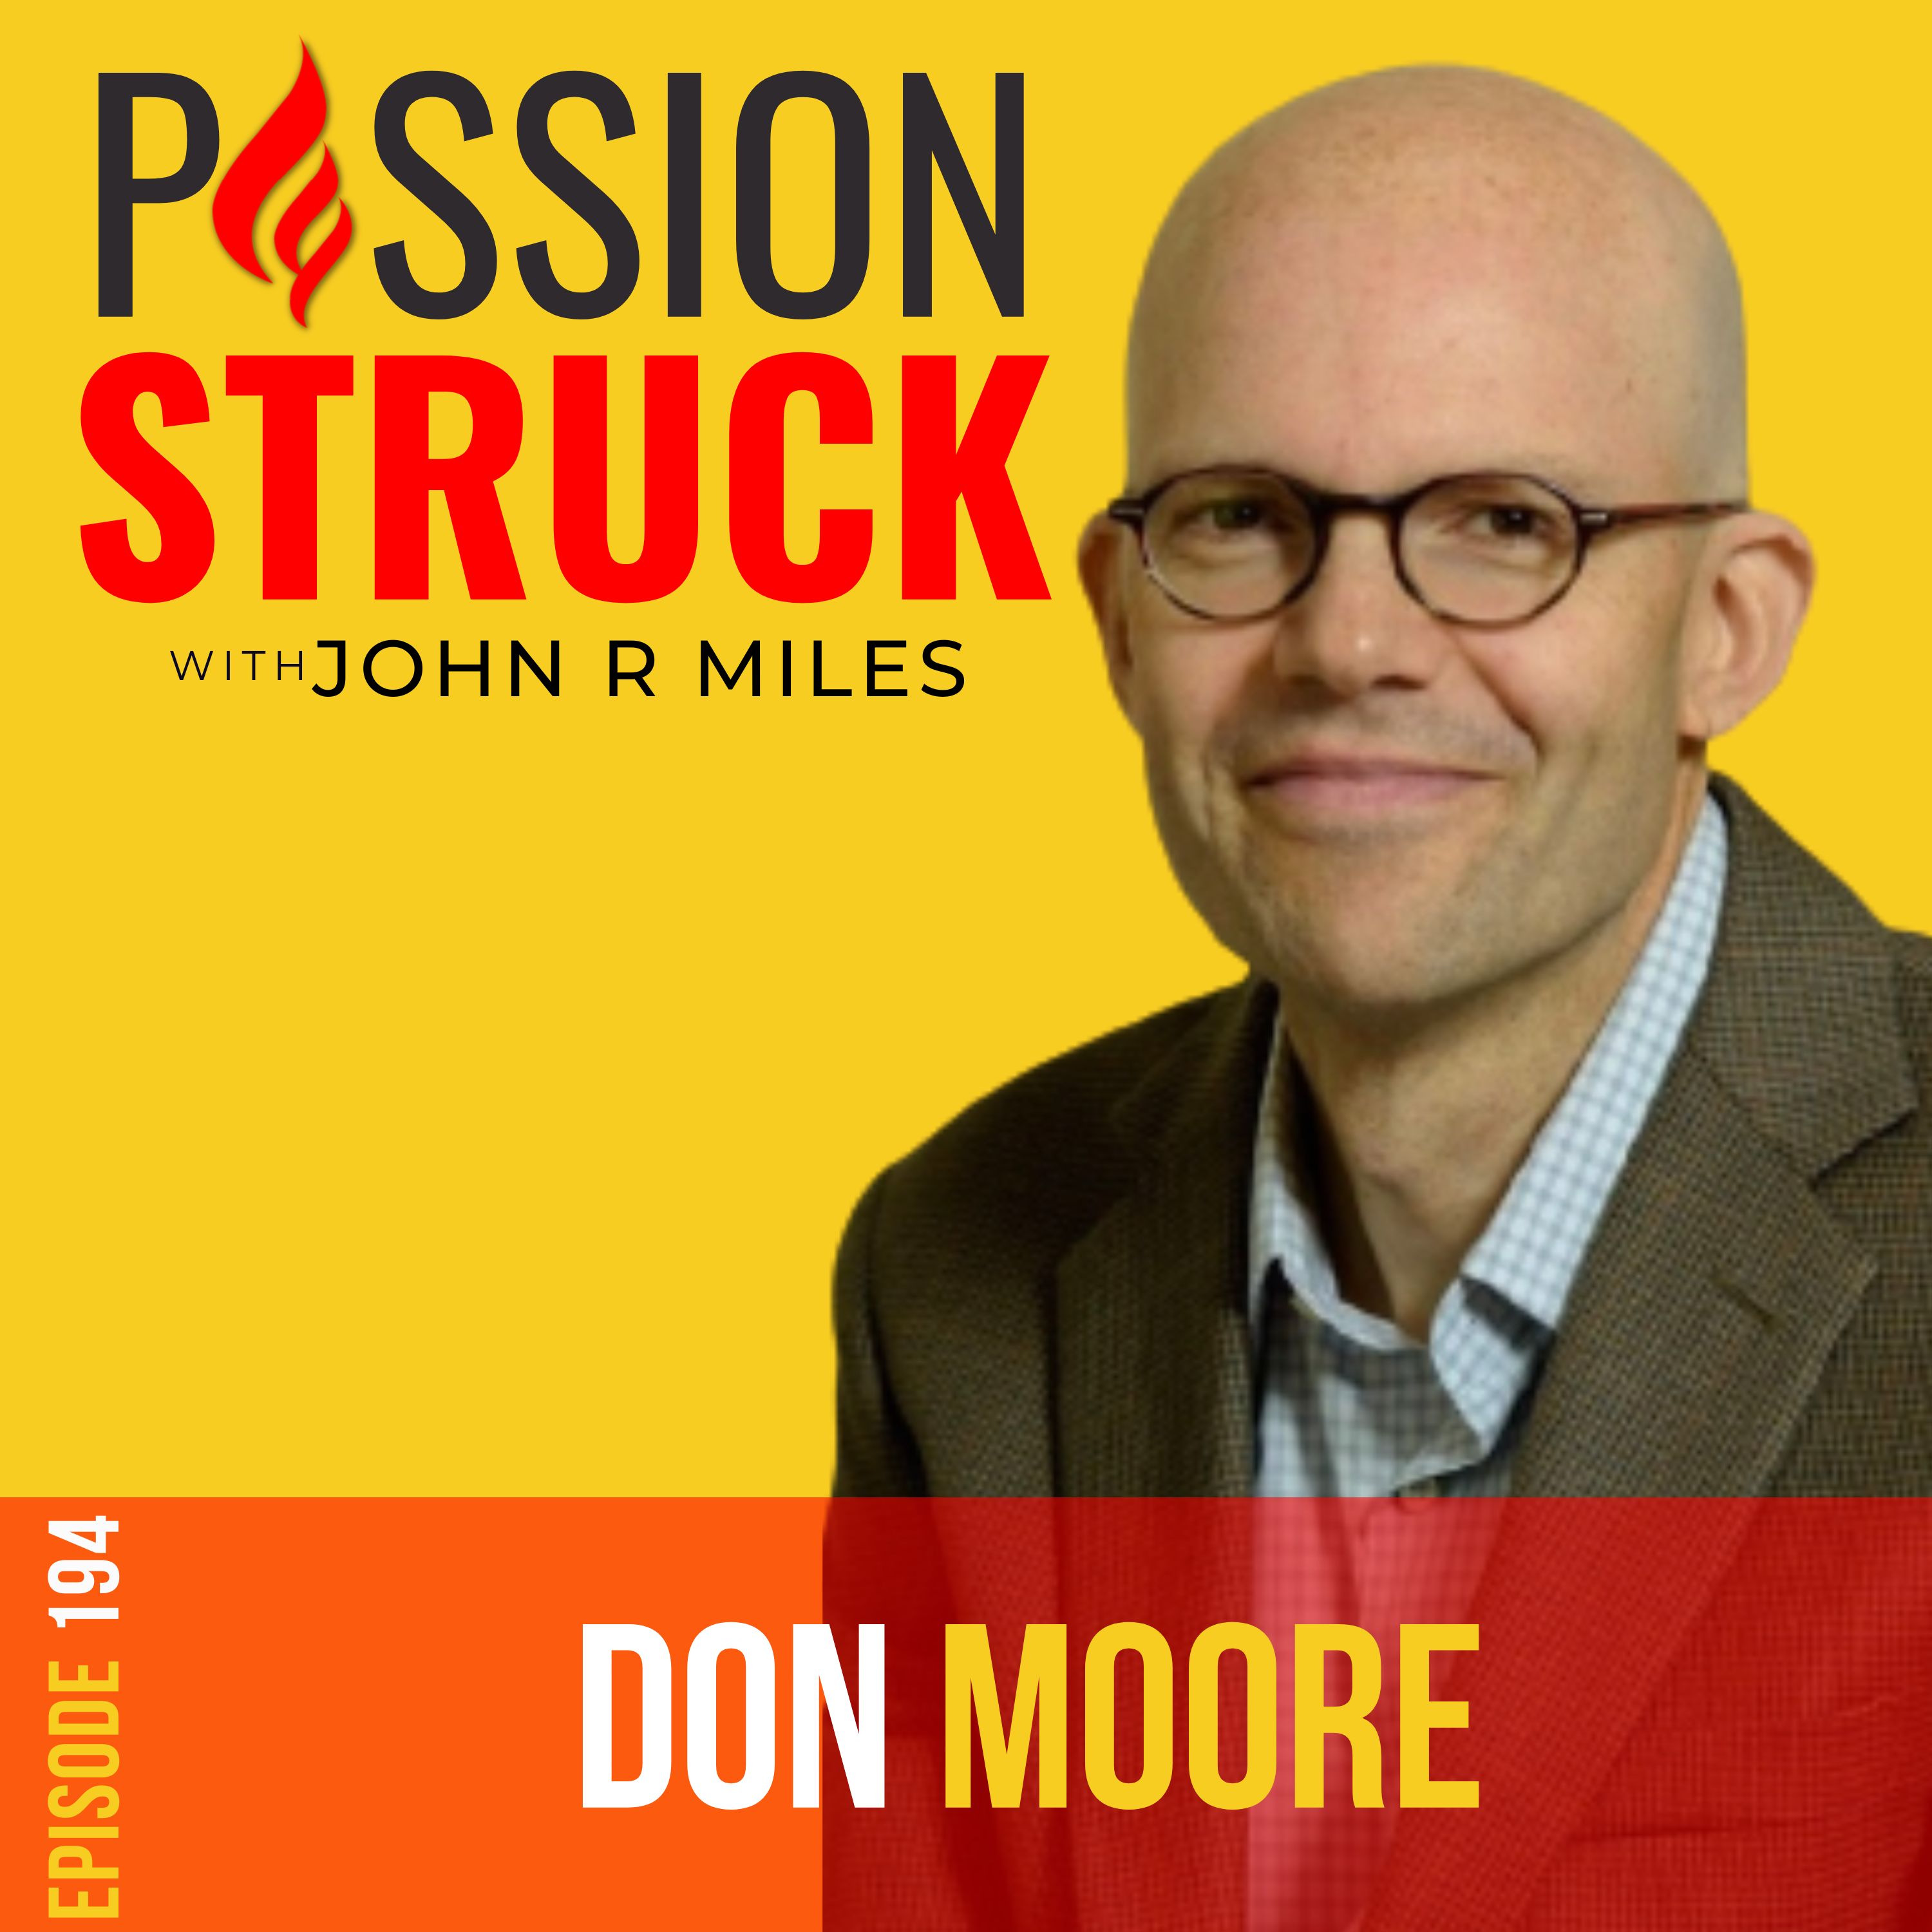 Passion Struck podcast album cover featuring Don Moore